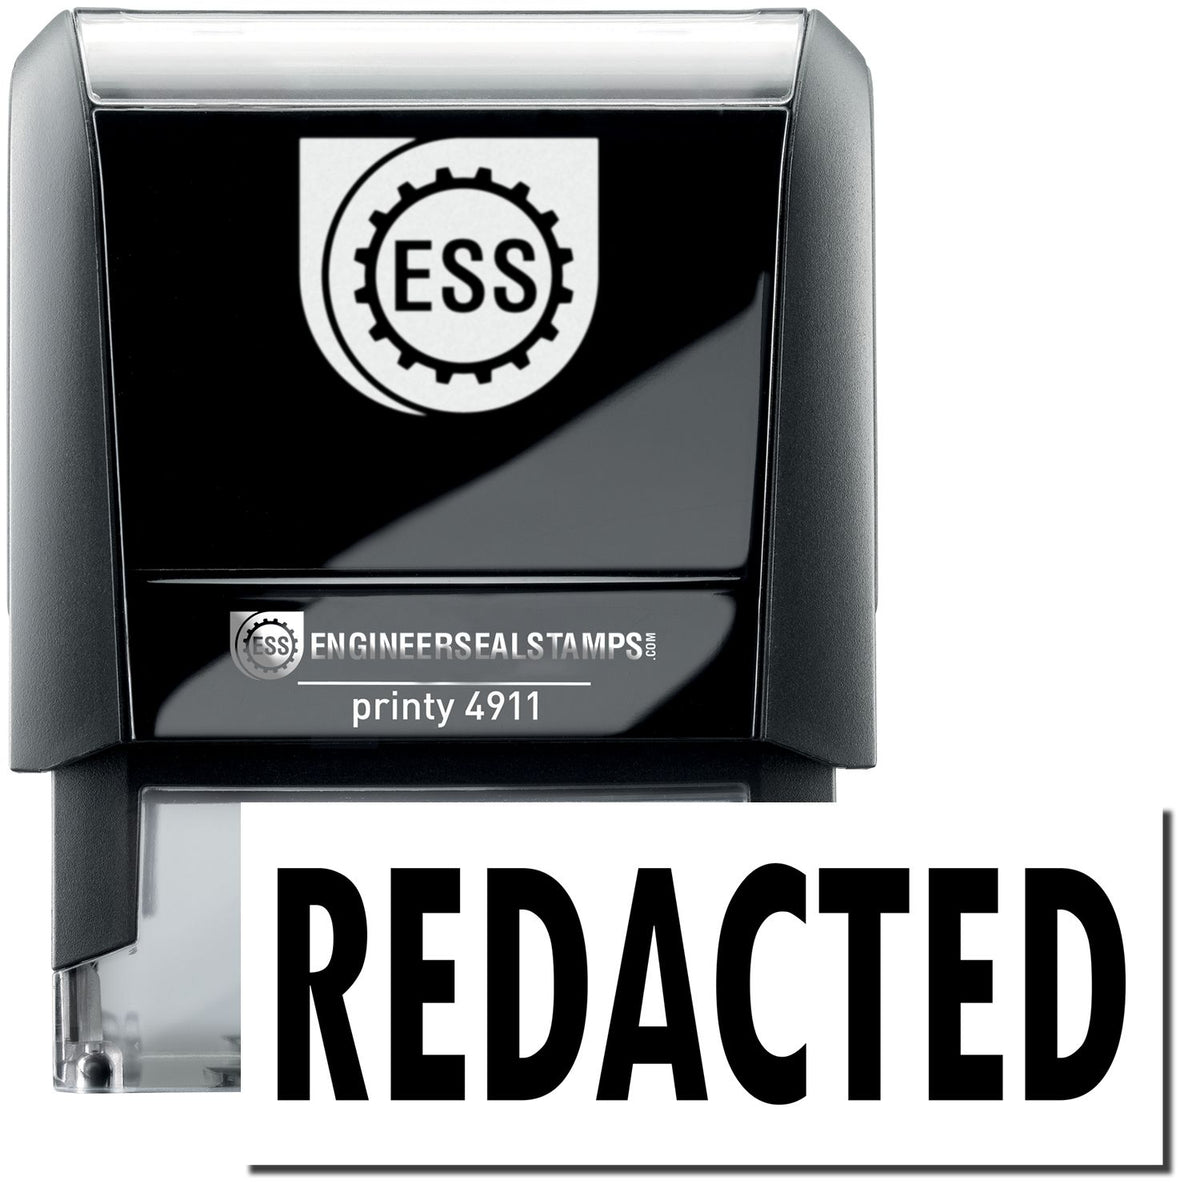 A self-inking stamp with a stamped image showing how the text &quot;REDACTED&quot; is displayed after stamping.